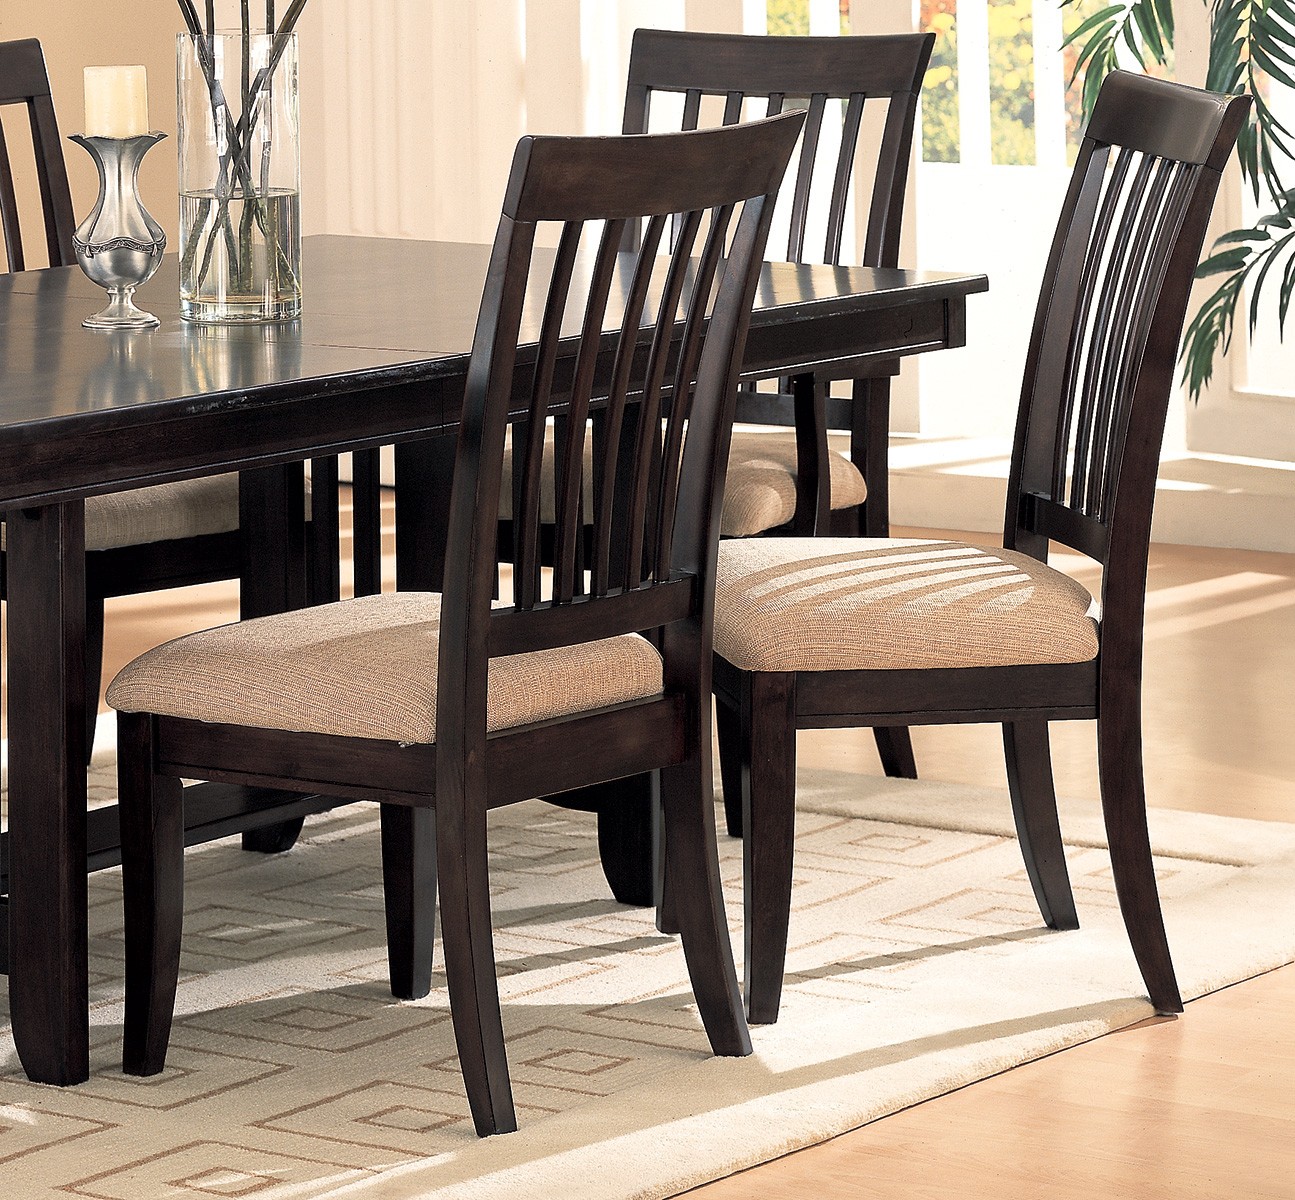 Wooden dining chairs 7